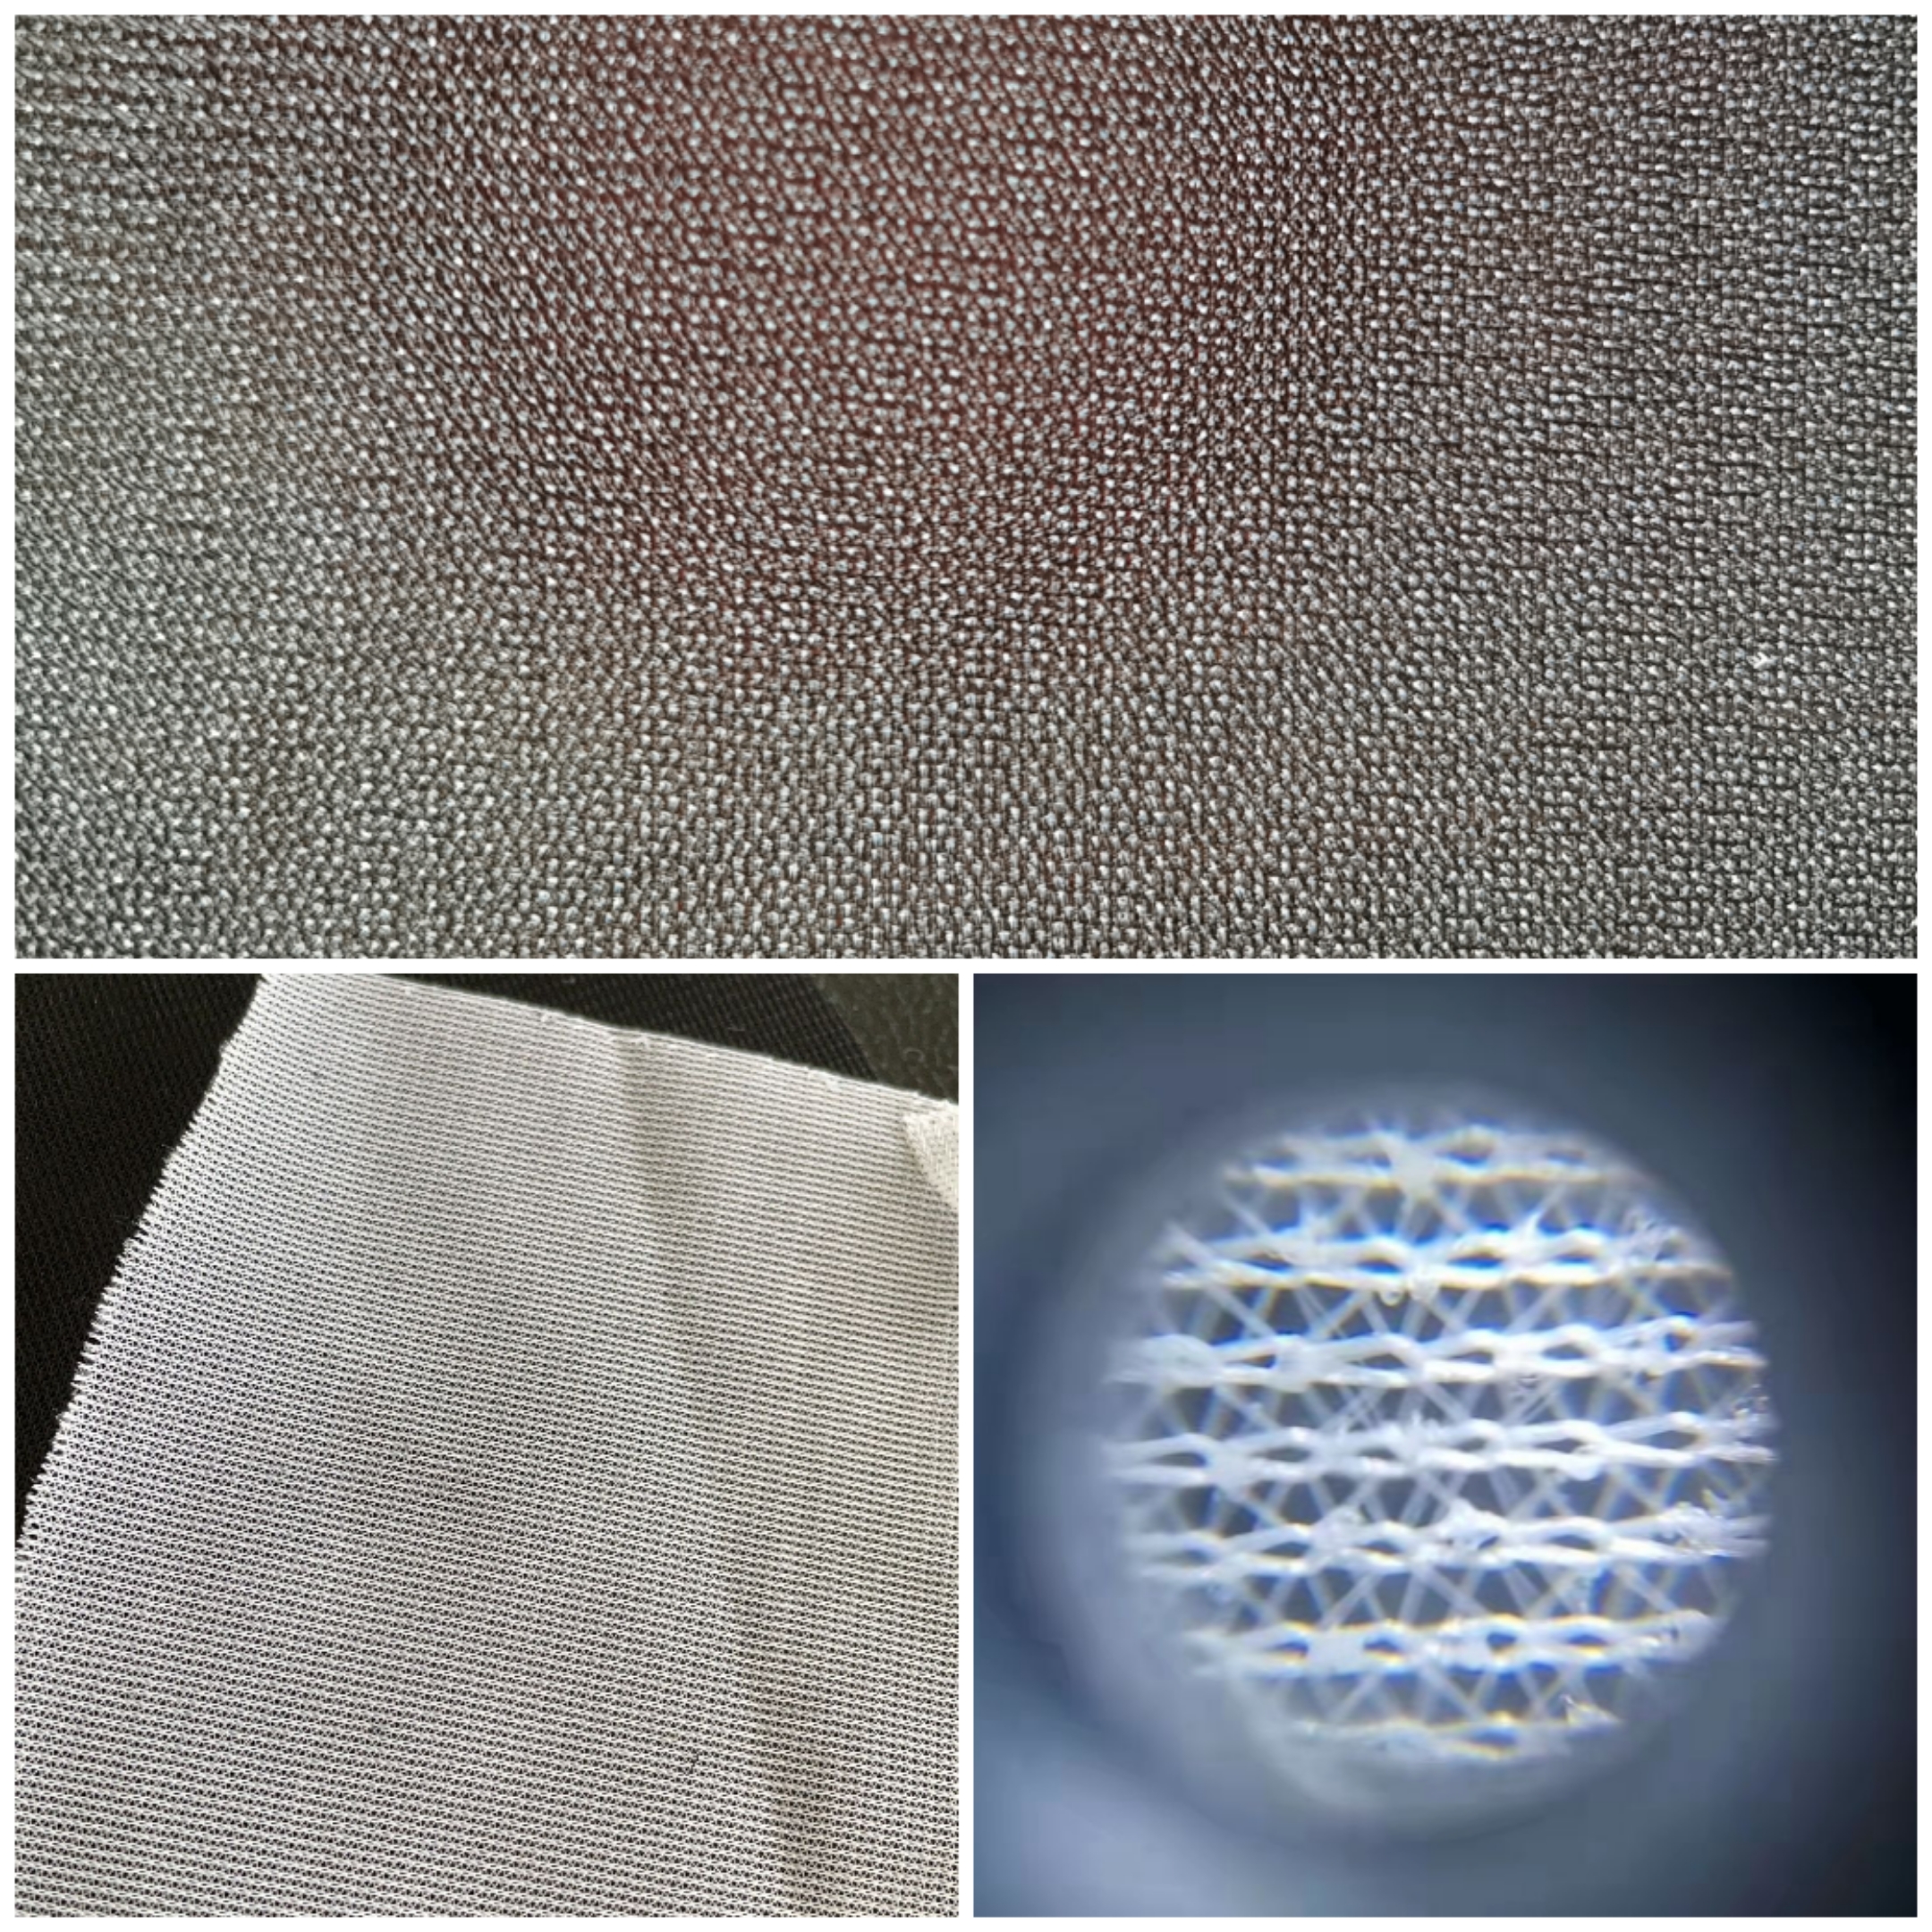 Tricot fabric fusing interlinling